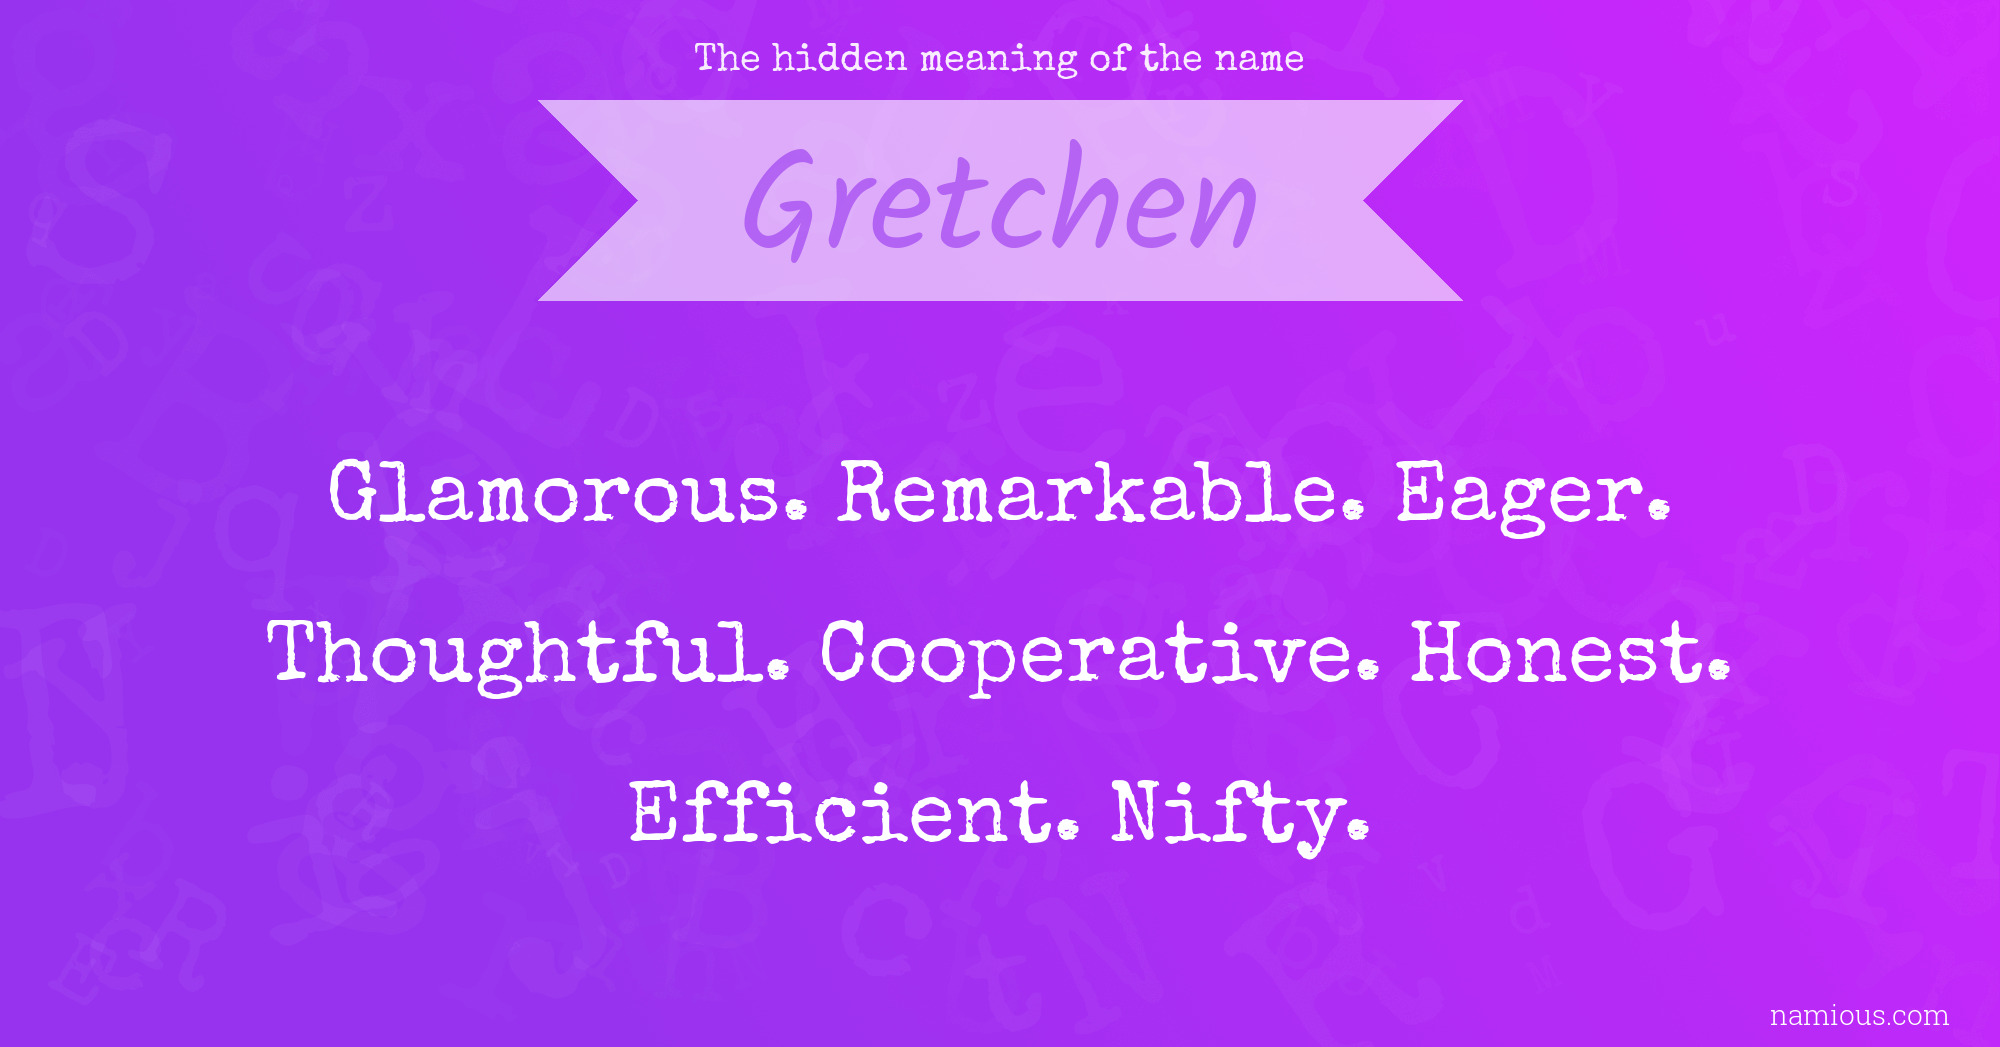 The hidden meaning of the name Gretchen